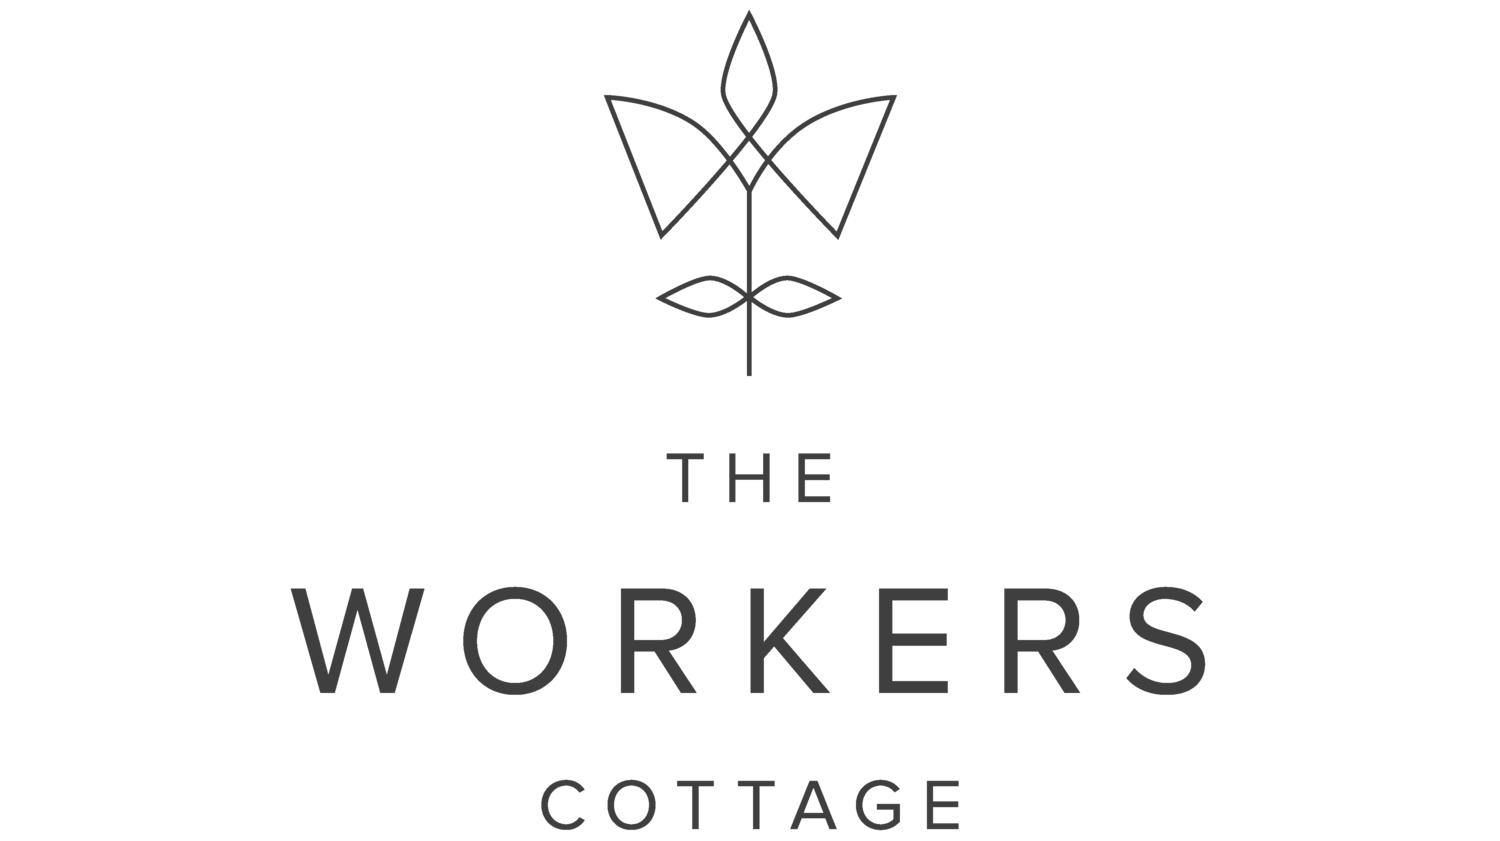 The Workers Cottage